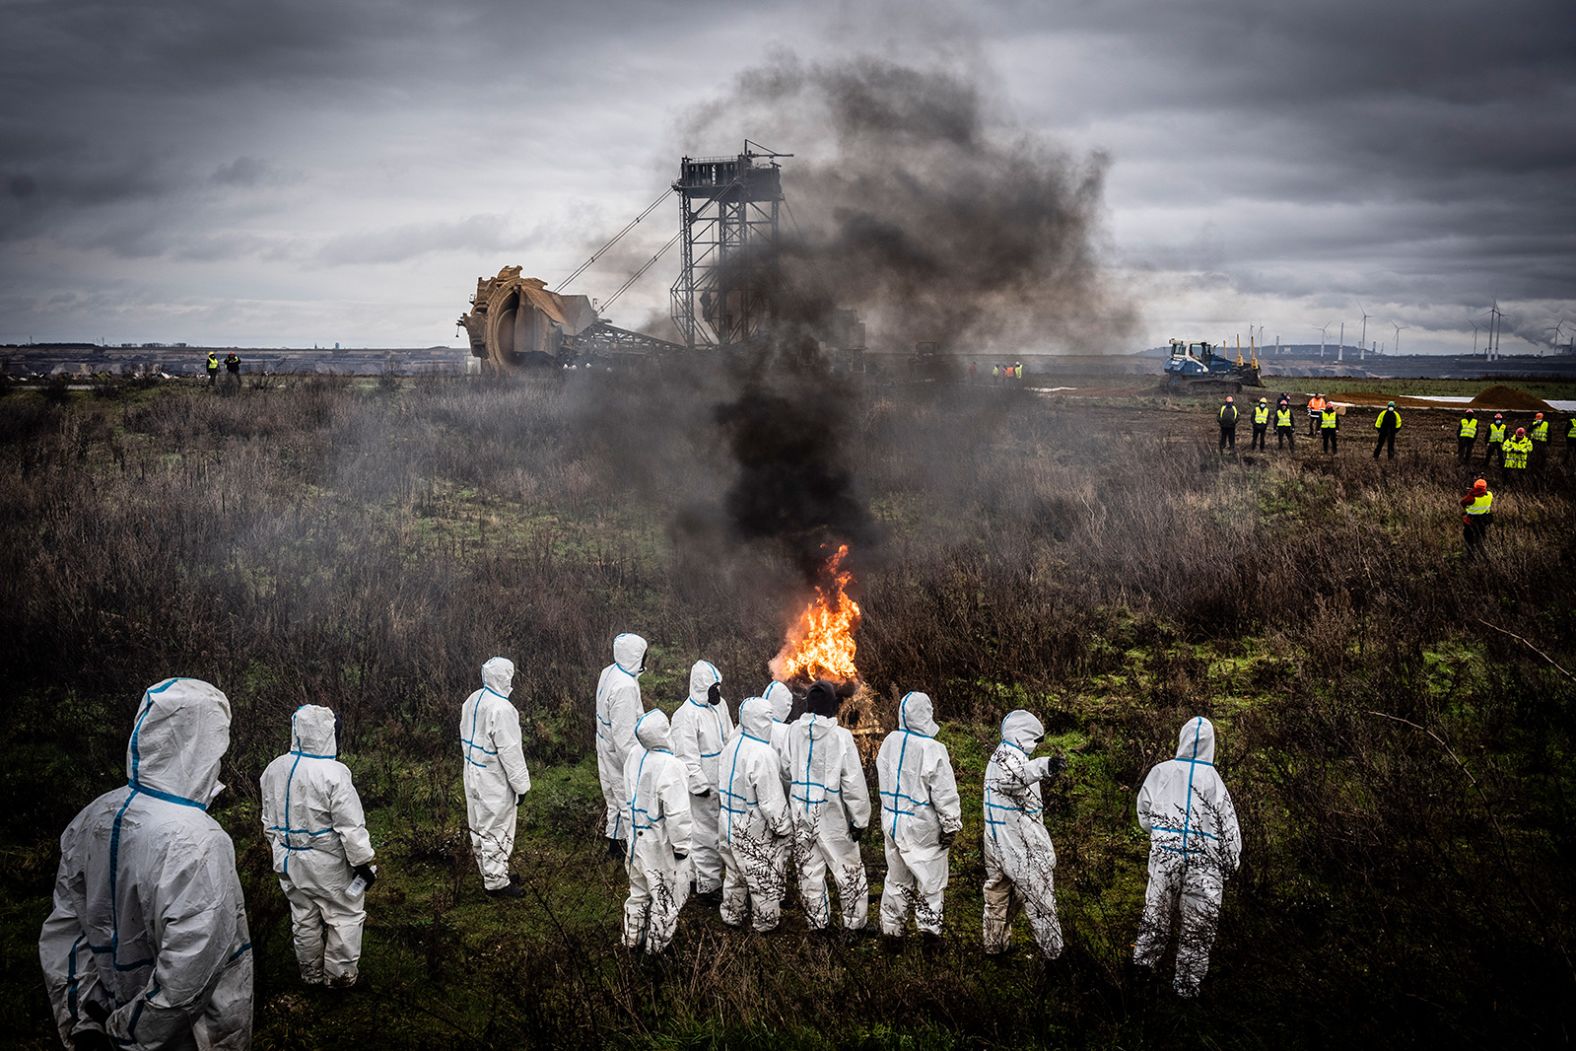 Activists clad in white overalls watch a fire burn in front of a bucket-wheel excavator in Lützerath, Germany, on Monday, January 2. The village is located on the edge of the still expanding Garzweiler II lignite surface. Despite heavy protests, it will soon be demolished to extract the underlying coal.